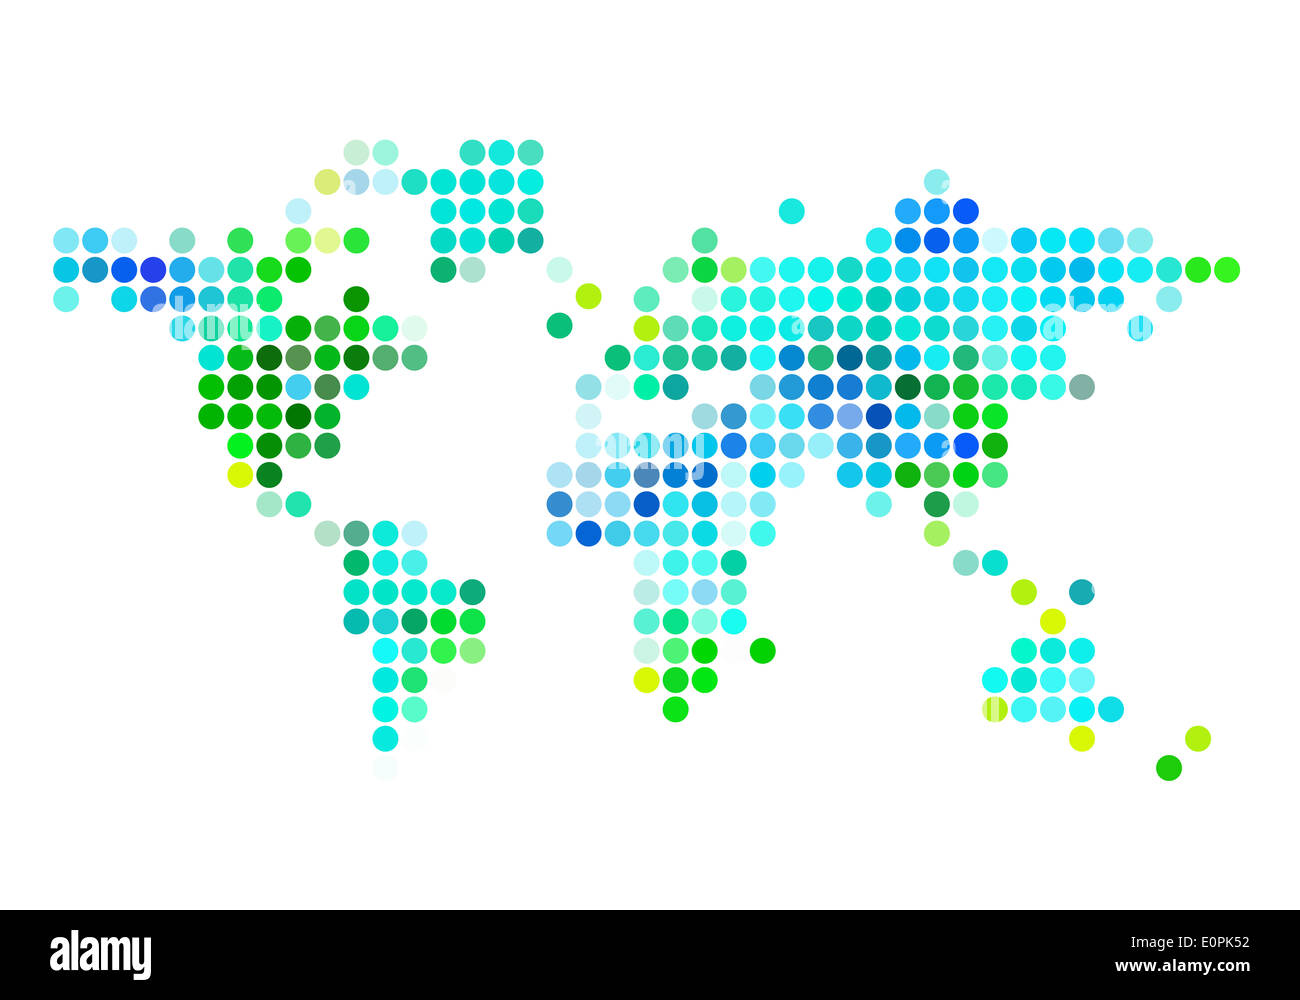 blue and green abstract world map with dot pattern, vector illustration Stock Photo